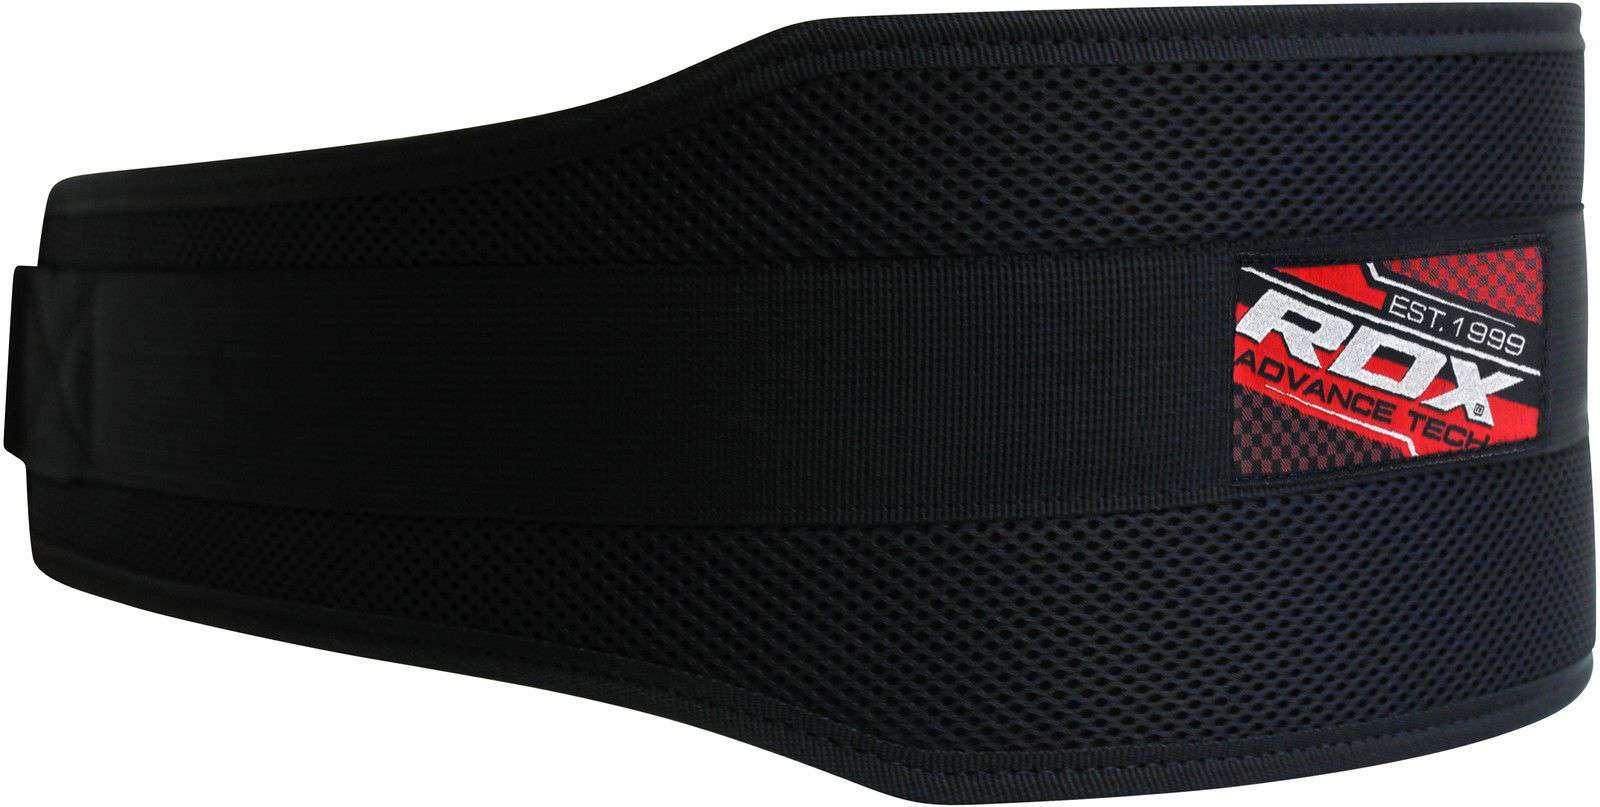 Dip (Dipping) Belt with Chain Back Support RDX 4DP - Fitness Health 